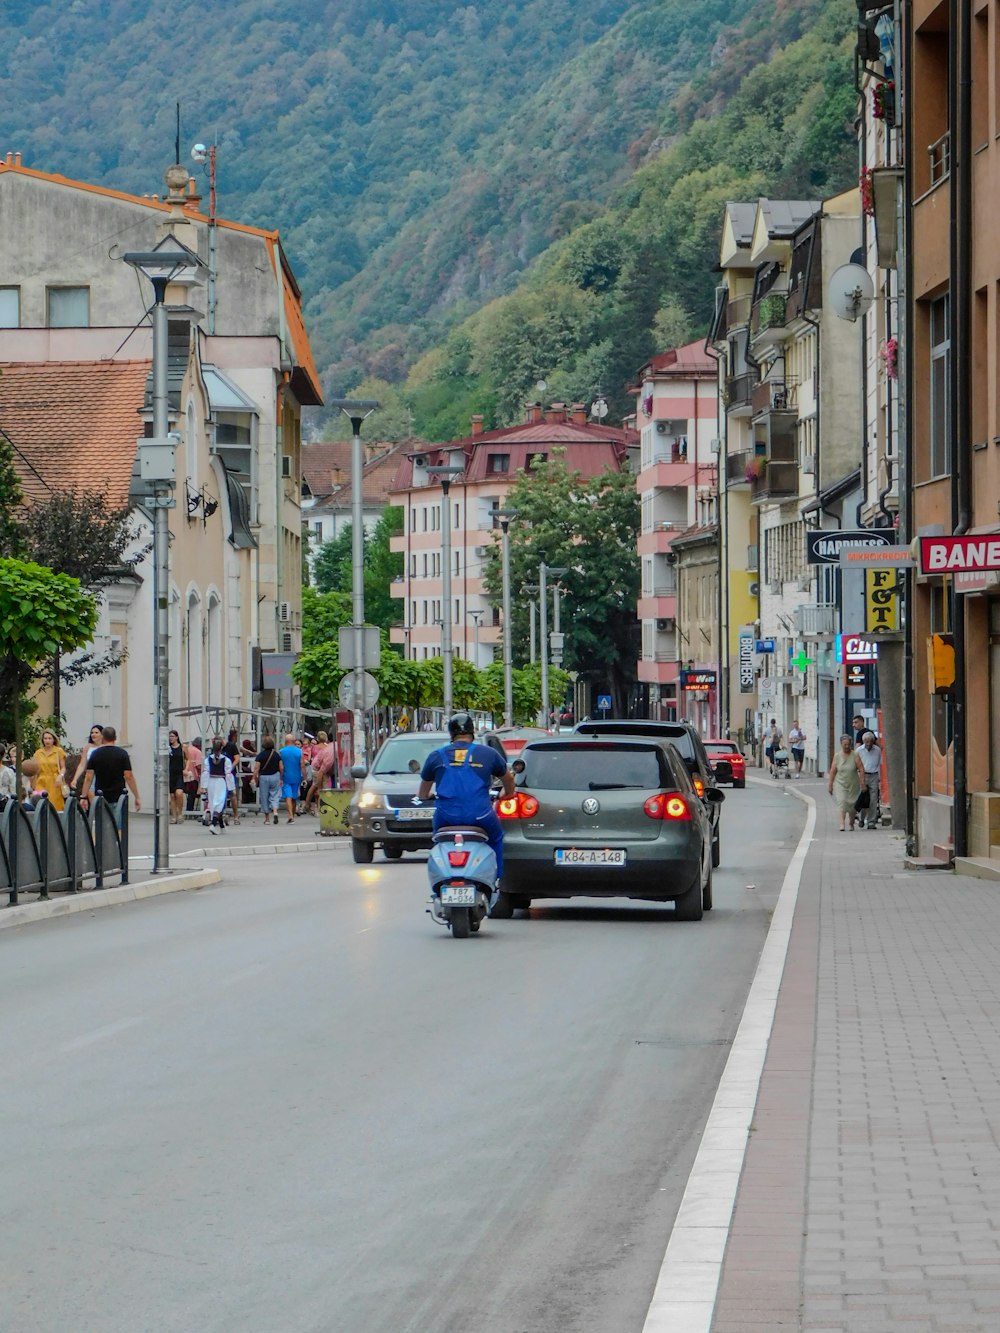 a motorcyclist riding down a street in a town